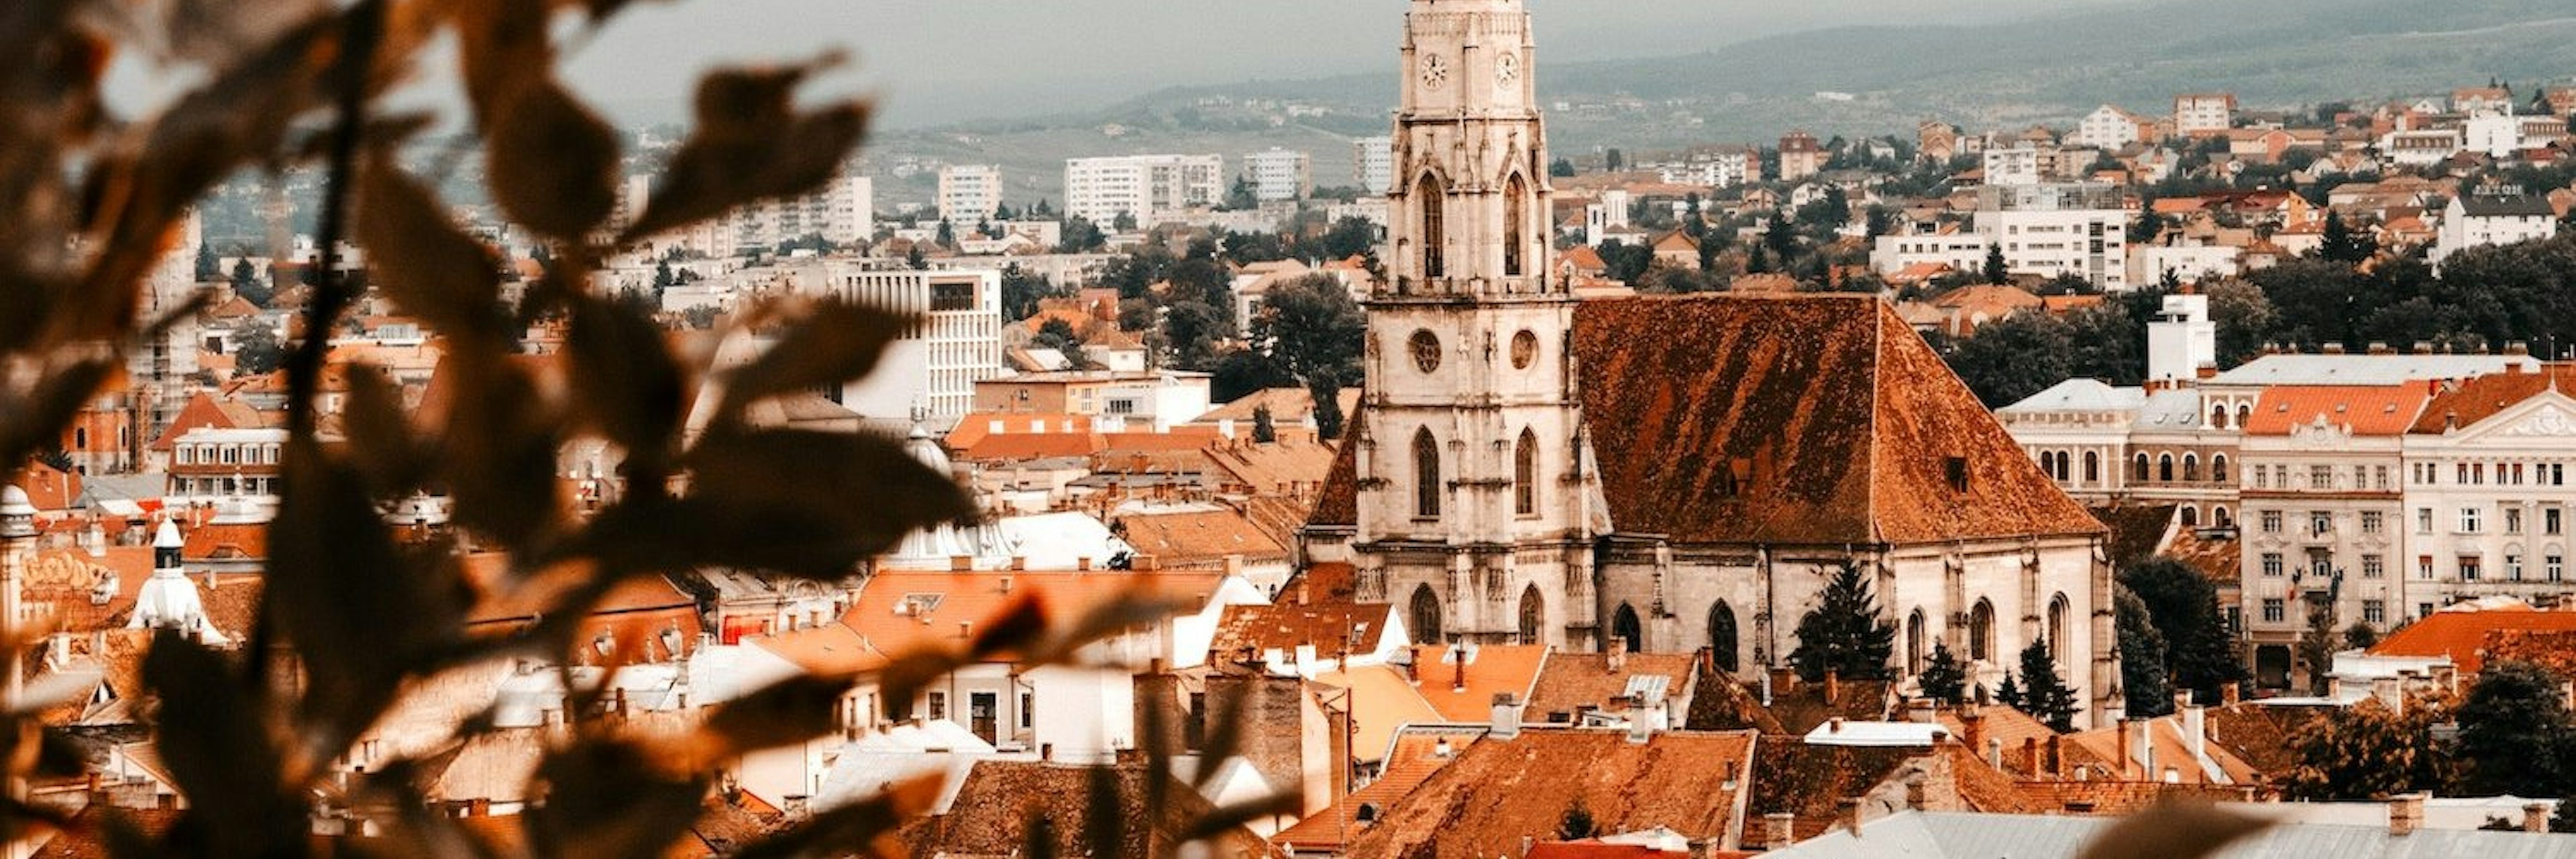 Photo of the city of Cluj in Romania